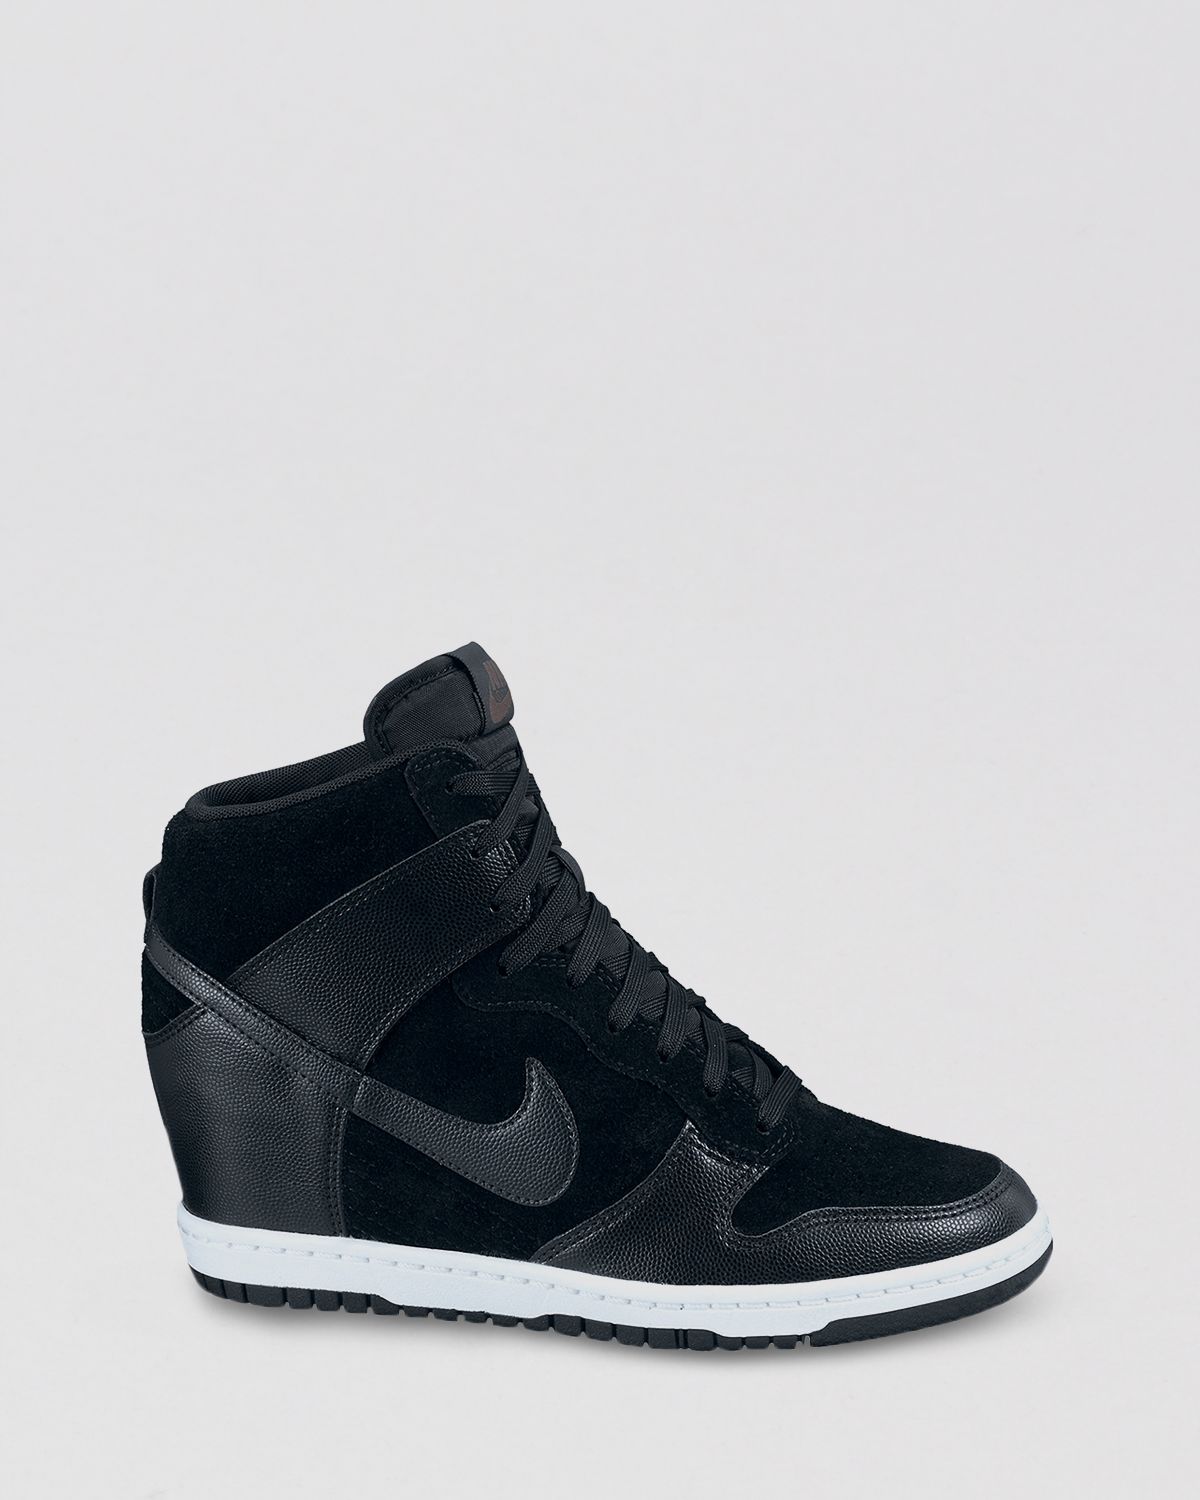 Lyst - Nike High Top Lace Up Sneakers Womens Dunk Sky Hi ...